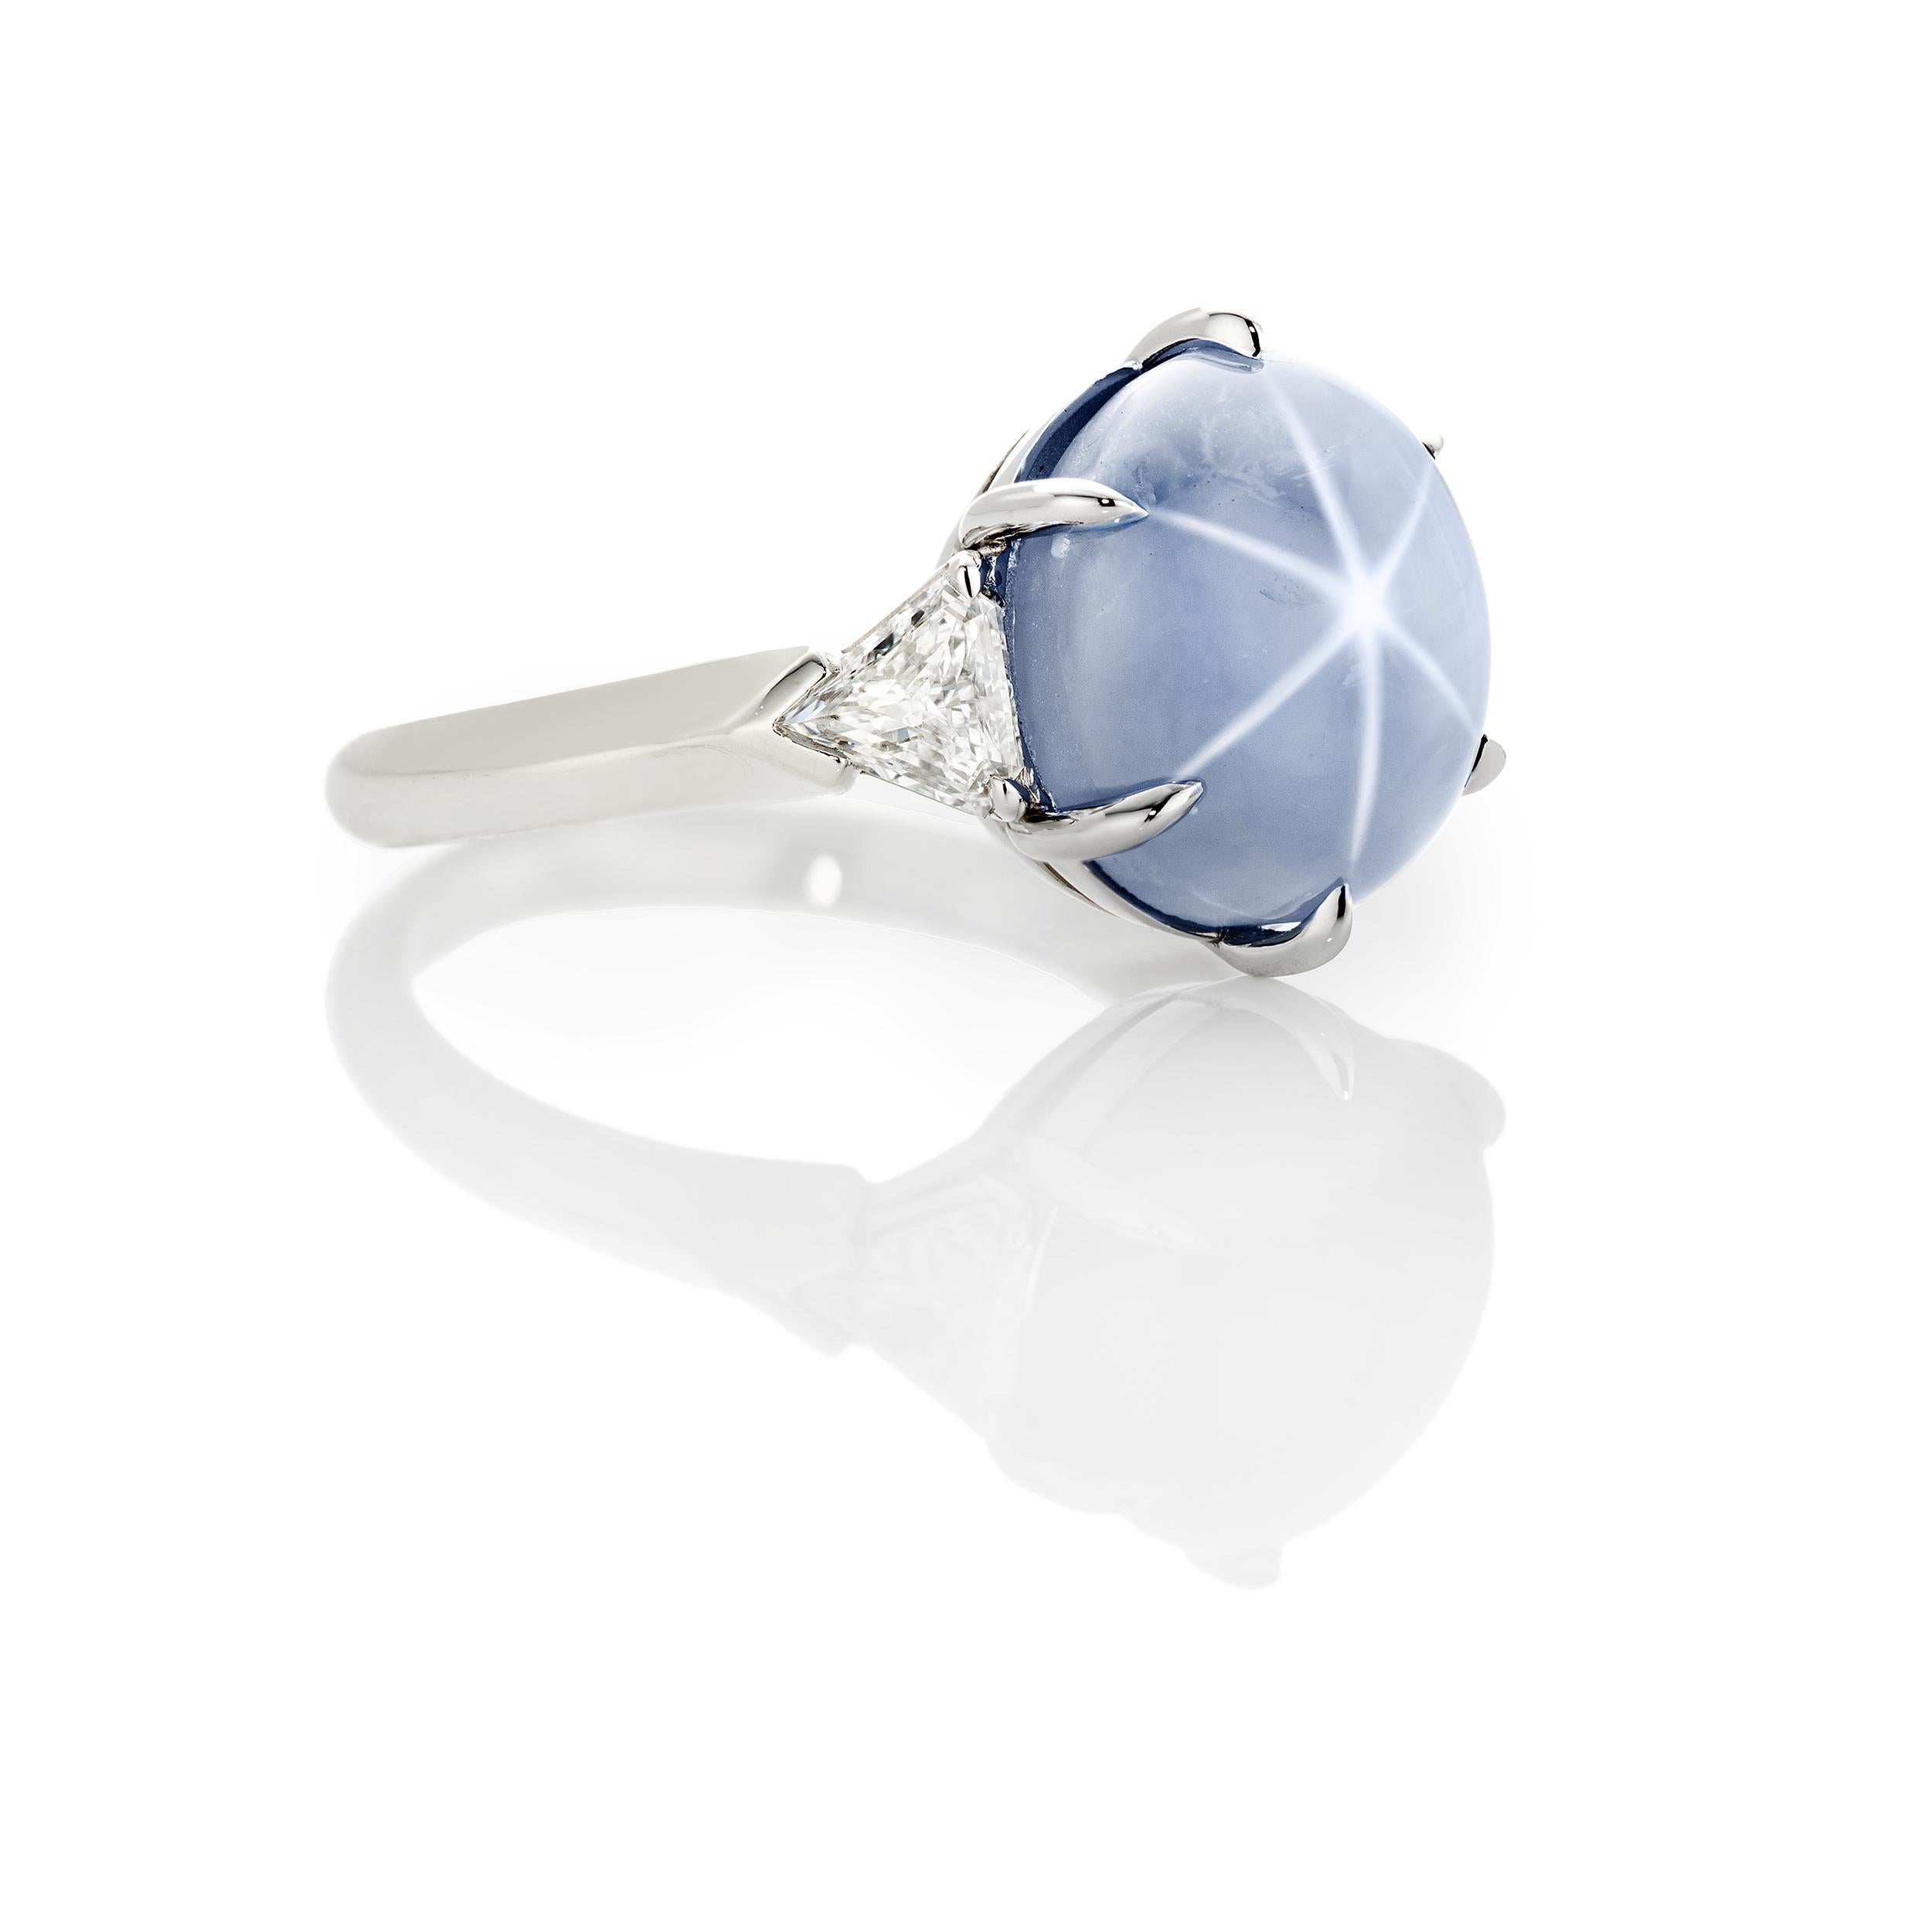 A classic ring is classic for a reason.  This ring is sophisticated and just lovely.  The Star Sapphire is Burmese, or some reference it as Magok, and untreated weighing 9.94 Carats.  There are two match Brilliant Cut Trillion Diamonds Weighing 0.52